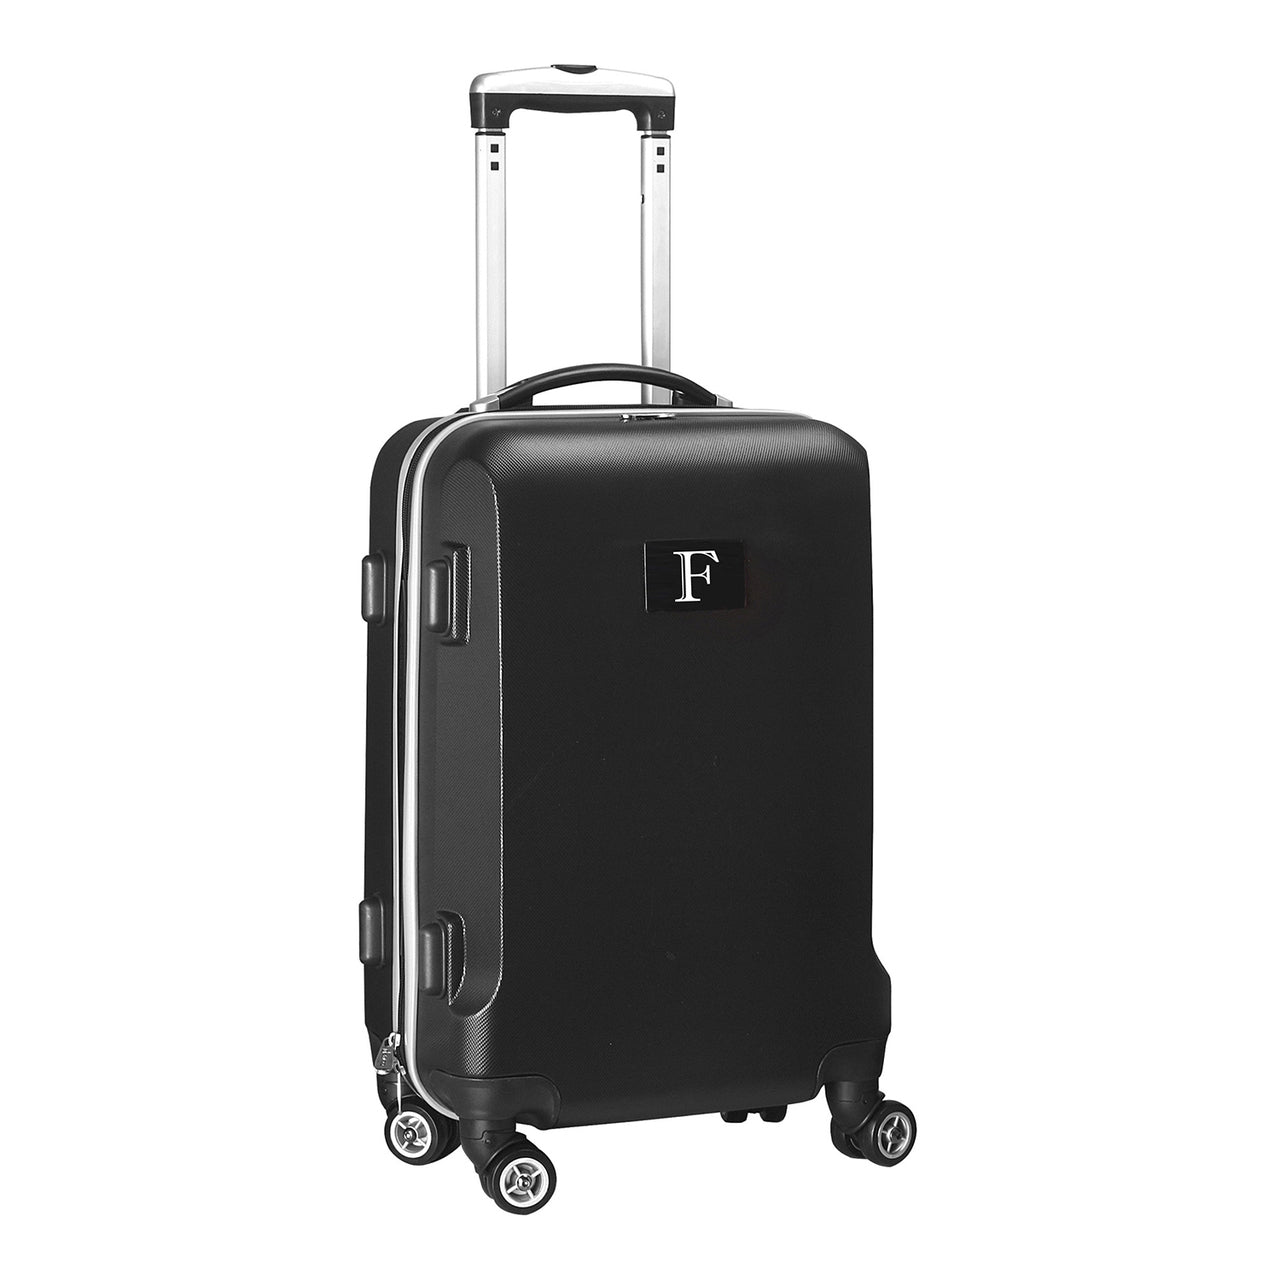 Personalized Initial Name letter "F" 20 inches Carry on Hardcase Spinner Luggage by Mojo in BLACK